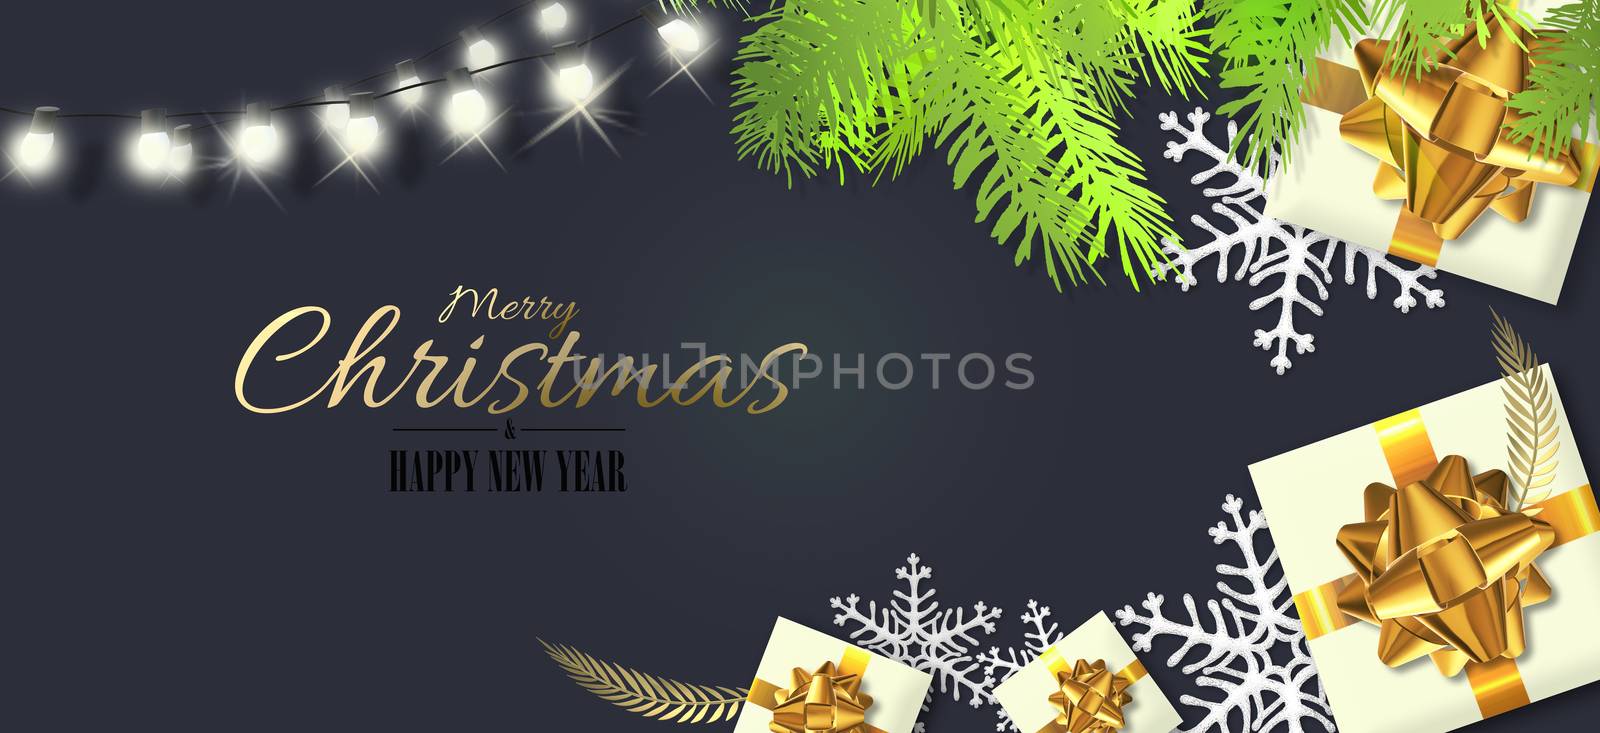 Christmas design with Xmas gift boxes in realistic 3D illustration. Xmas gift box, golden bow, Xmas fir, gold shiny text Merry Christmas Happy New Year on dark blue background. Horizontal card, header